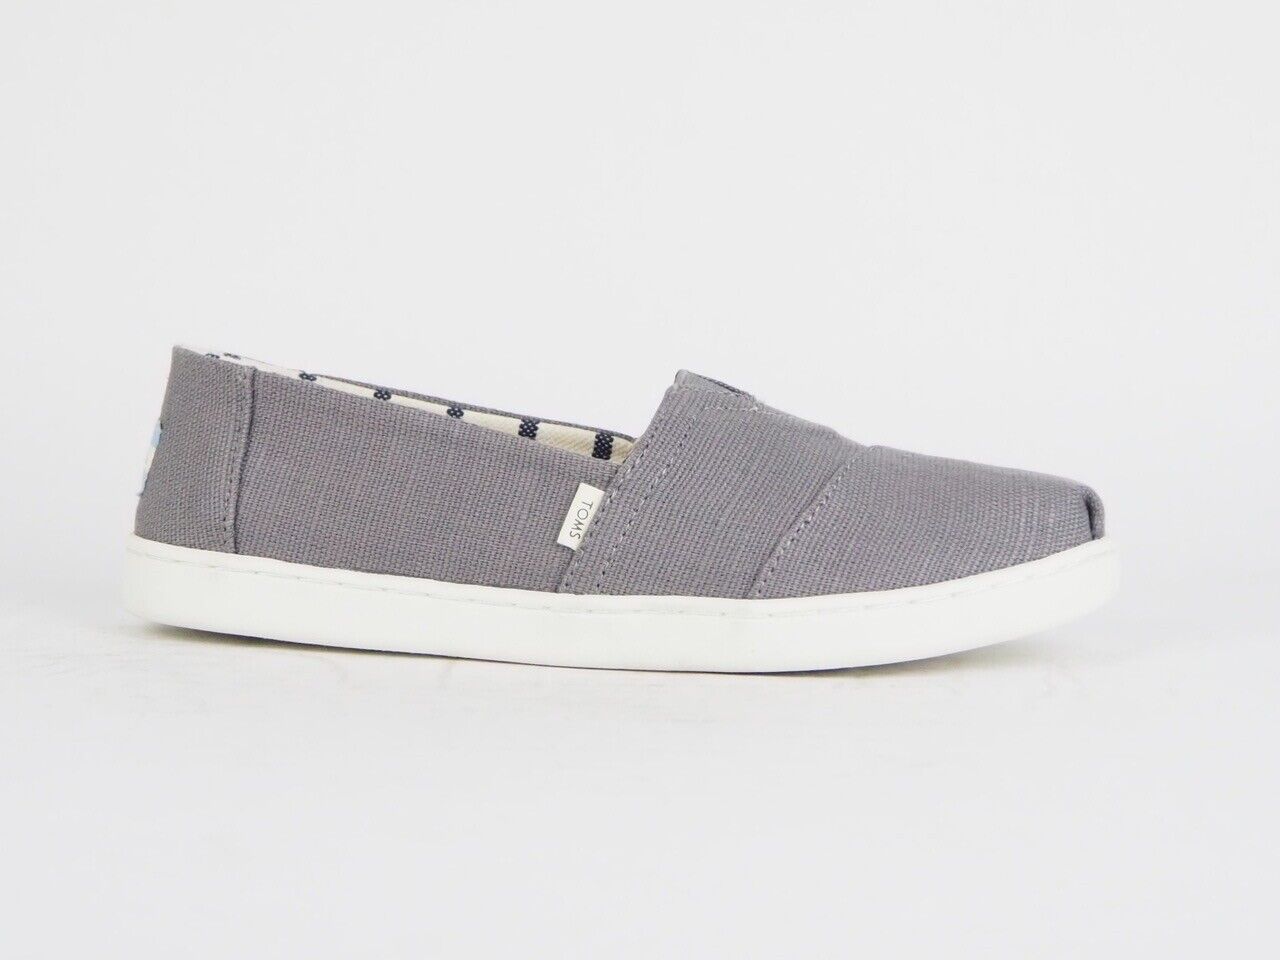 Mens Toms Classic Shade Heritage Canvas Flats Slip On Trainers Uk 7 EU 40.5